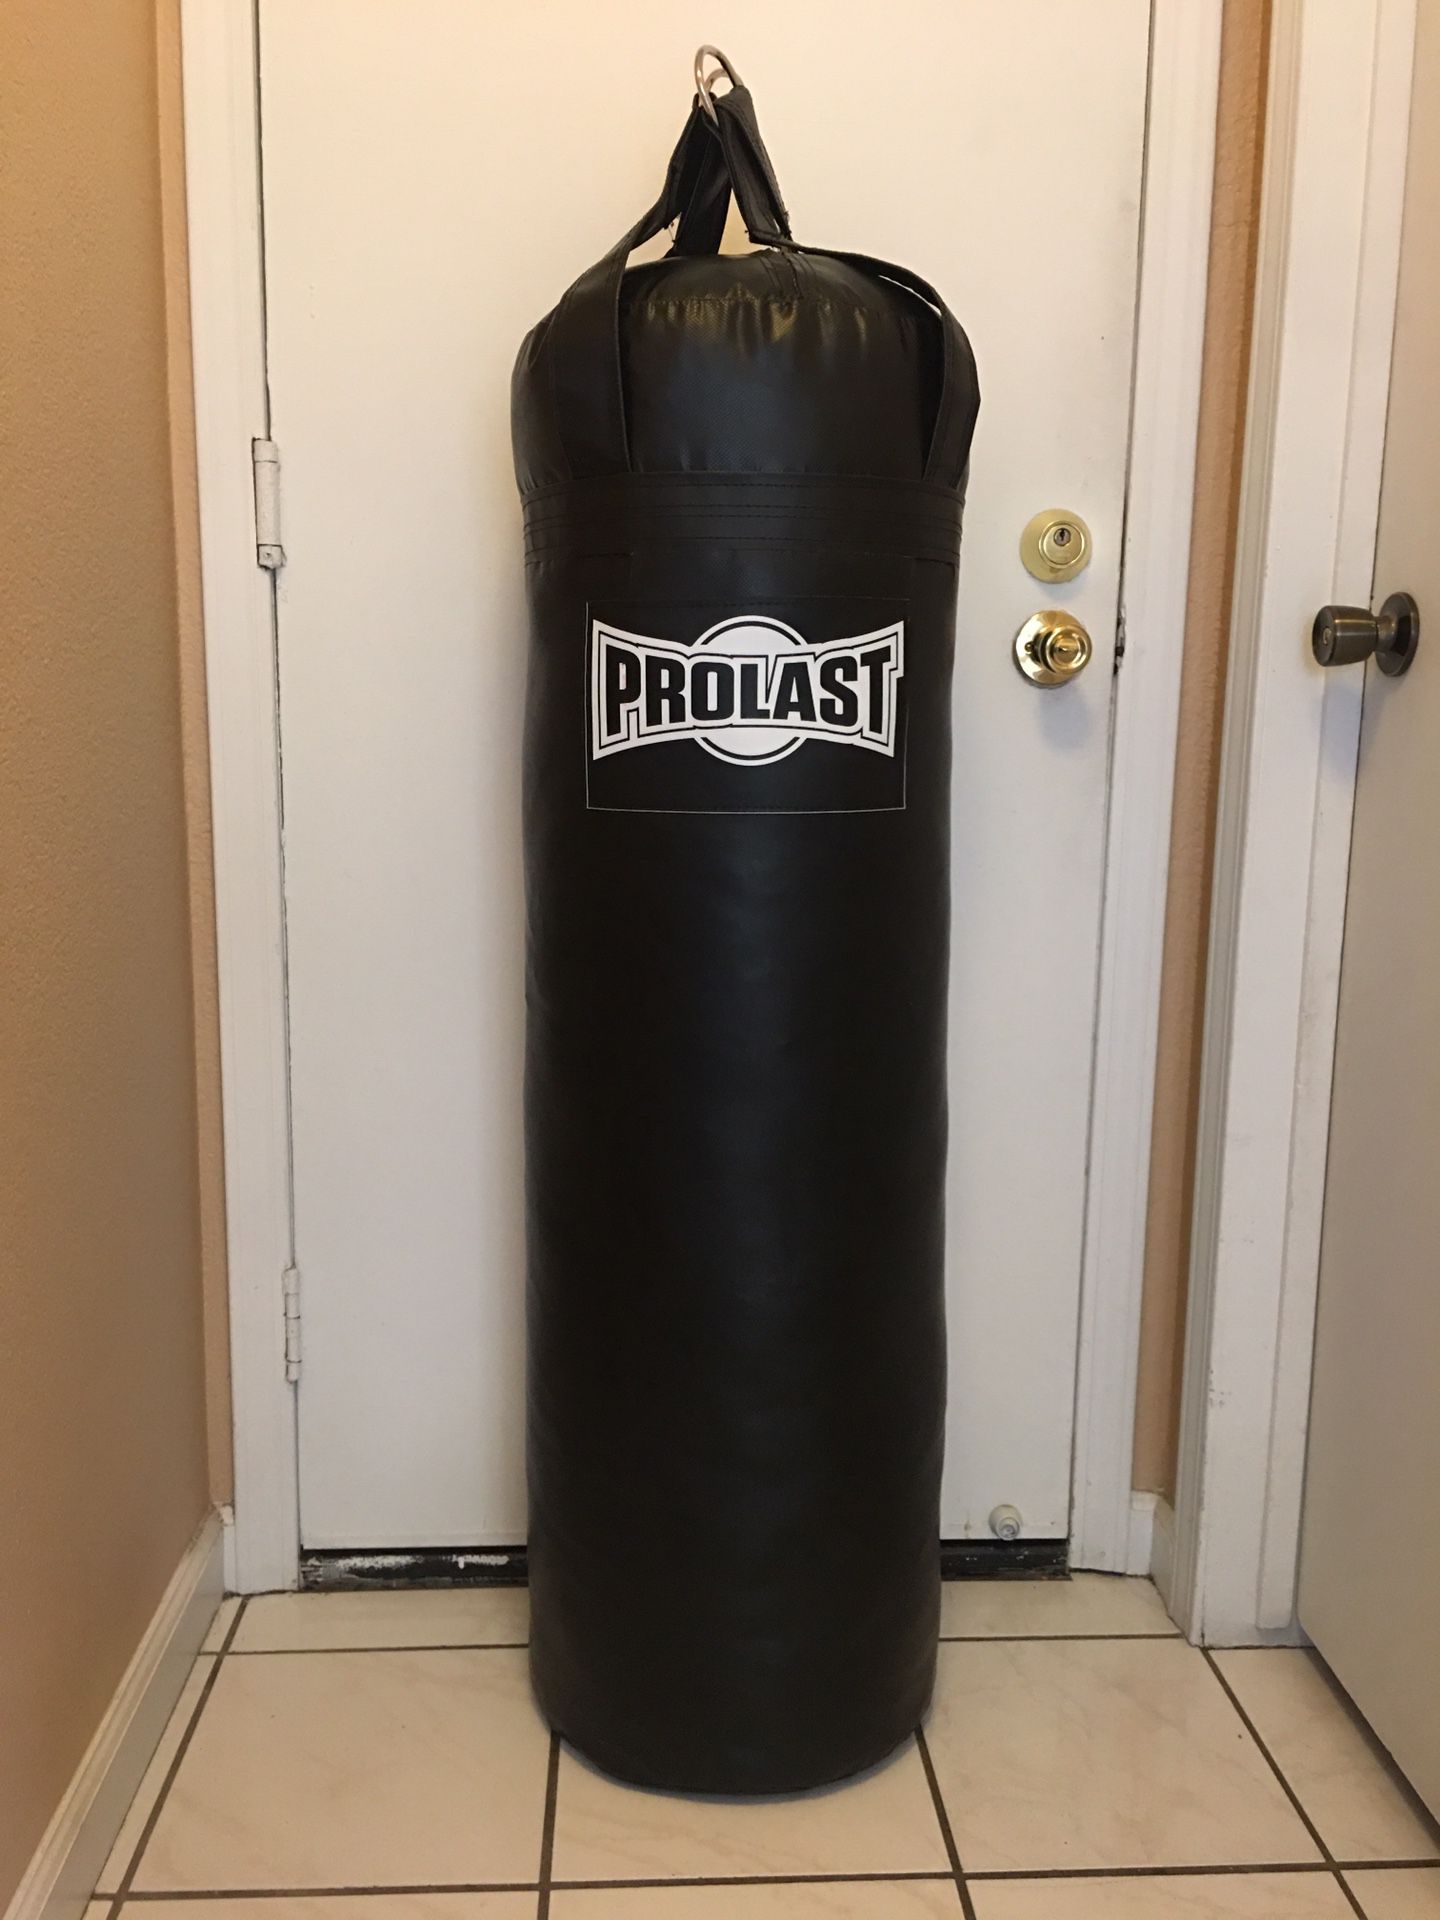 PUNCHING BAG BRAND NEW 100 POUNDS FILLED LUXURY ABOUT FIVE FEET TALL MADE USA 🇺🇸 